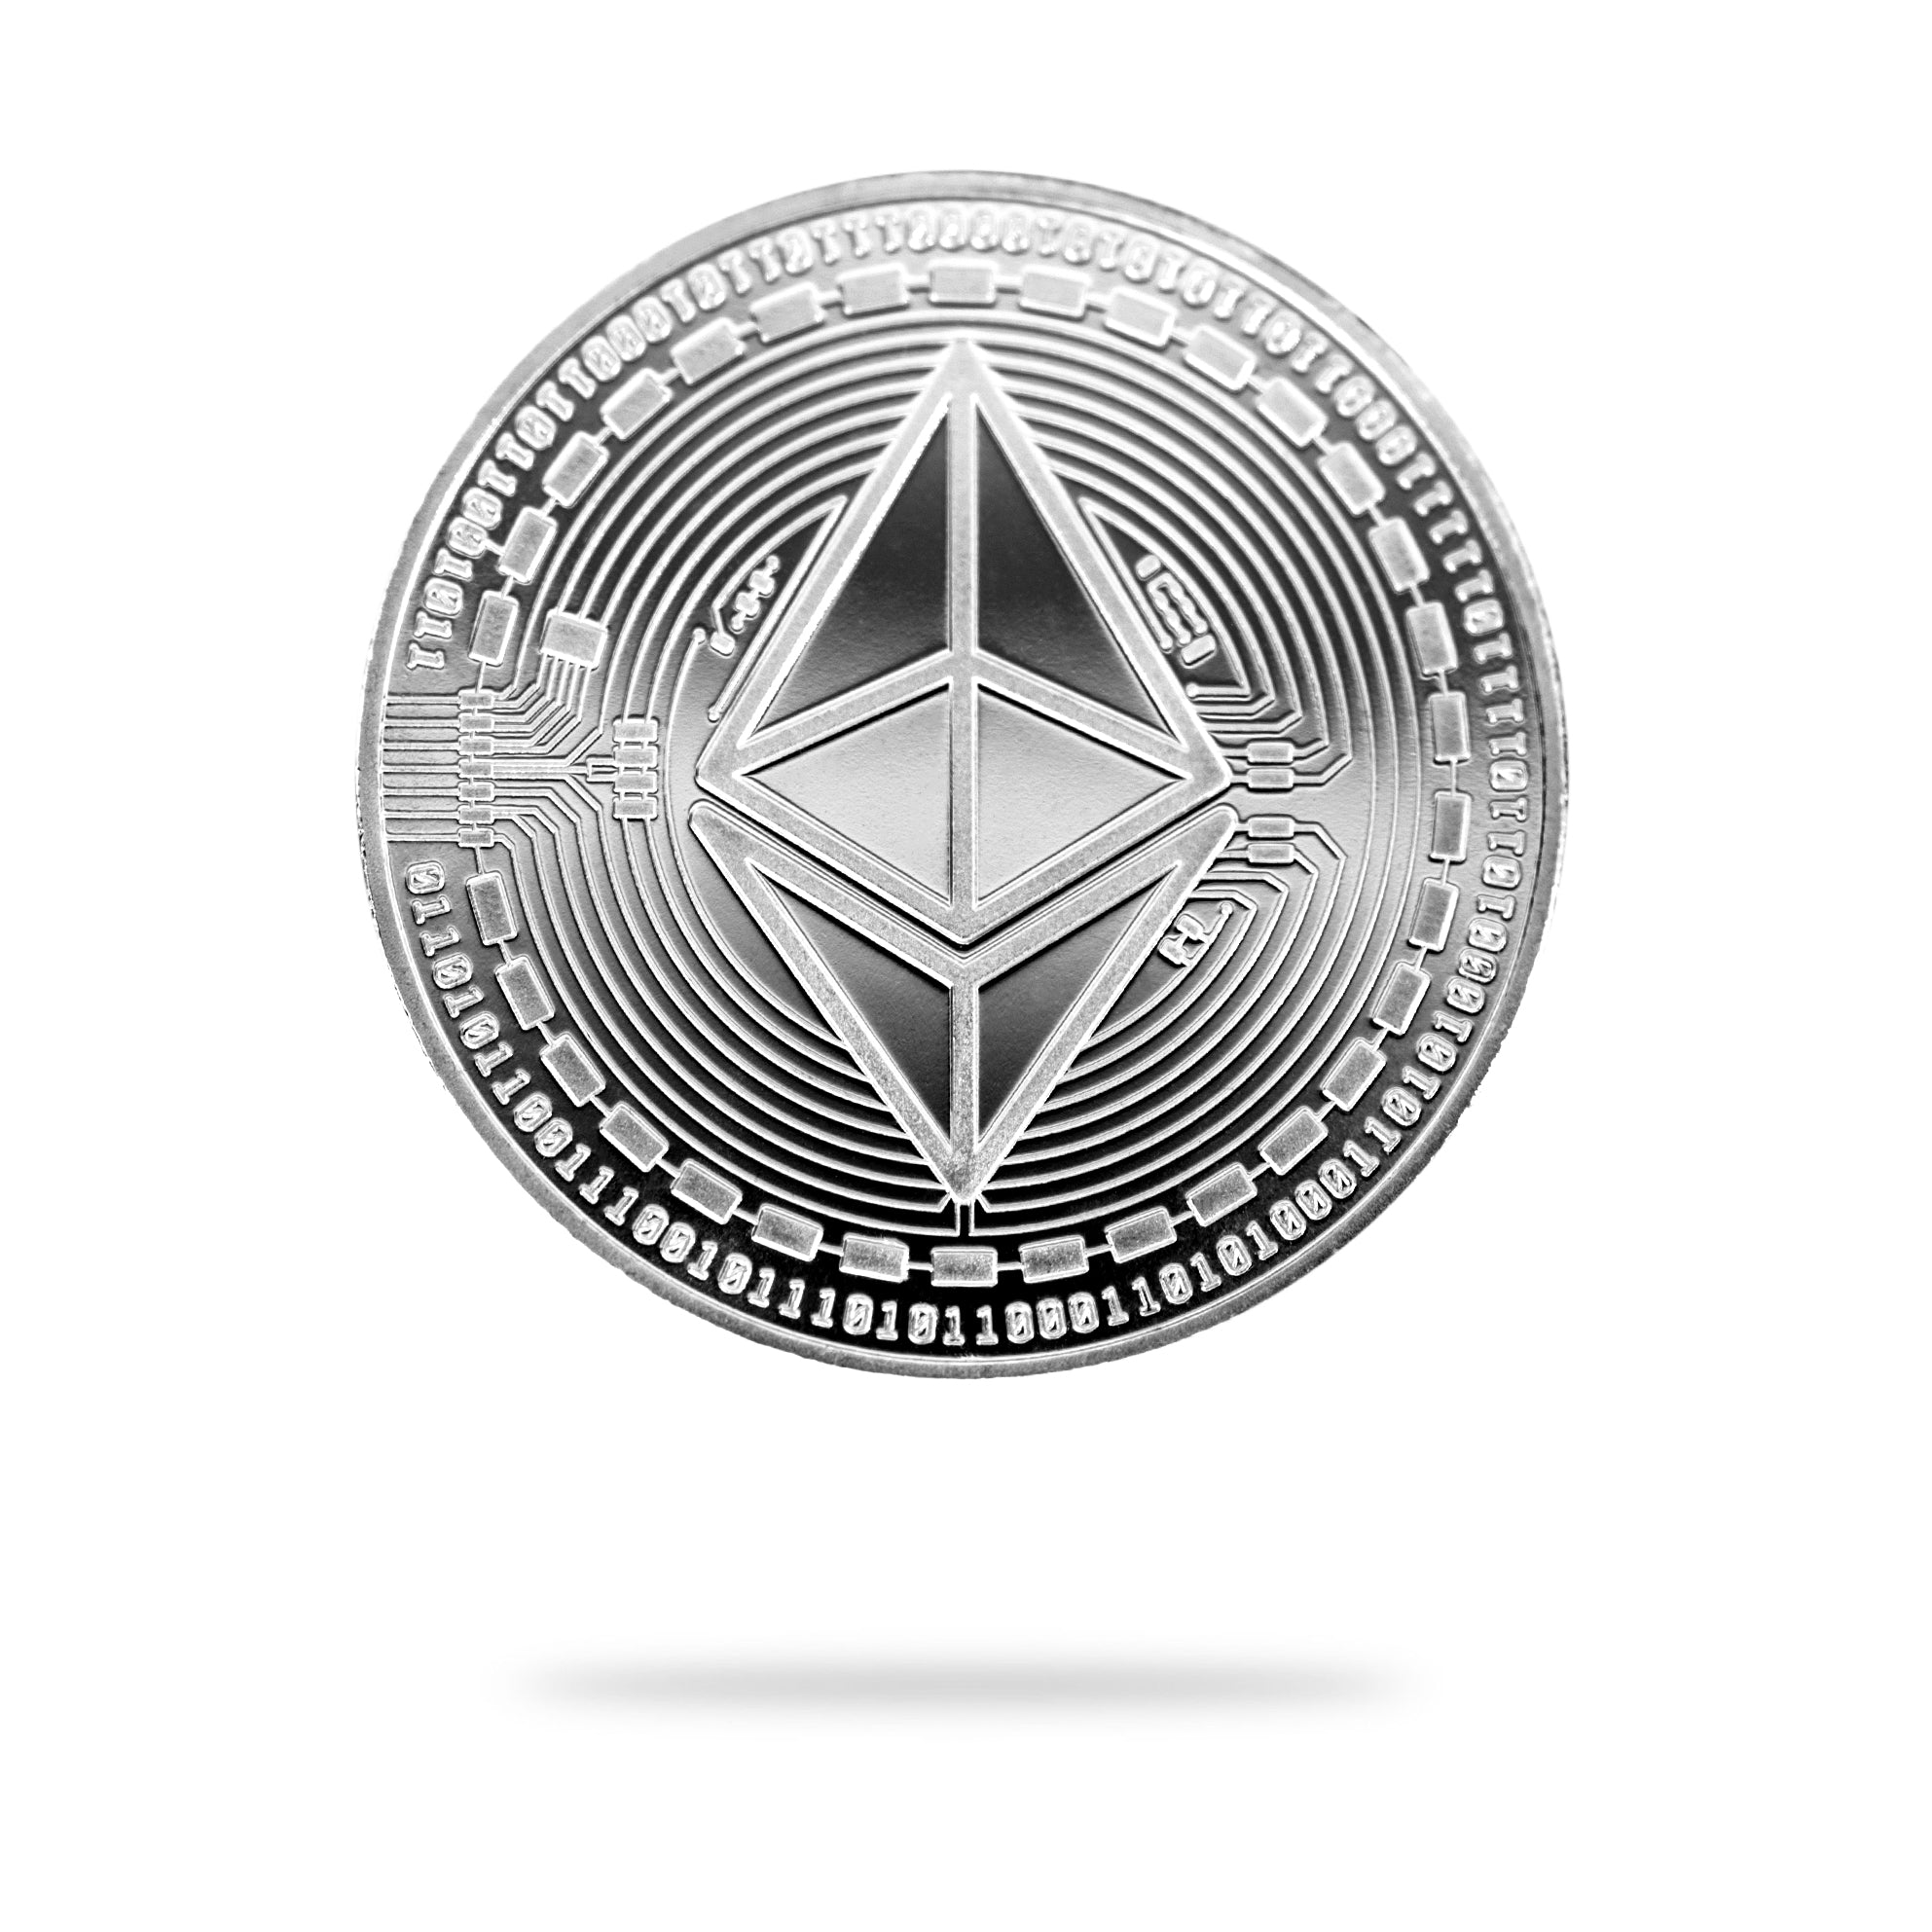 Cryptochips | Ethereum Classic Physical Crypto Coin. Collectable cryptocurrency merch you can hodl